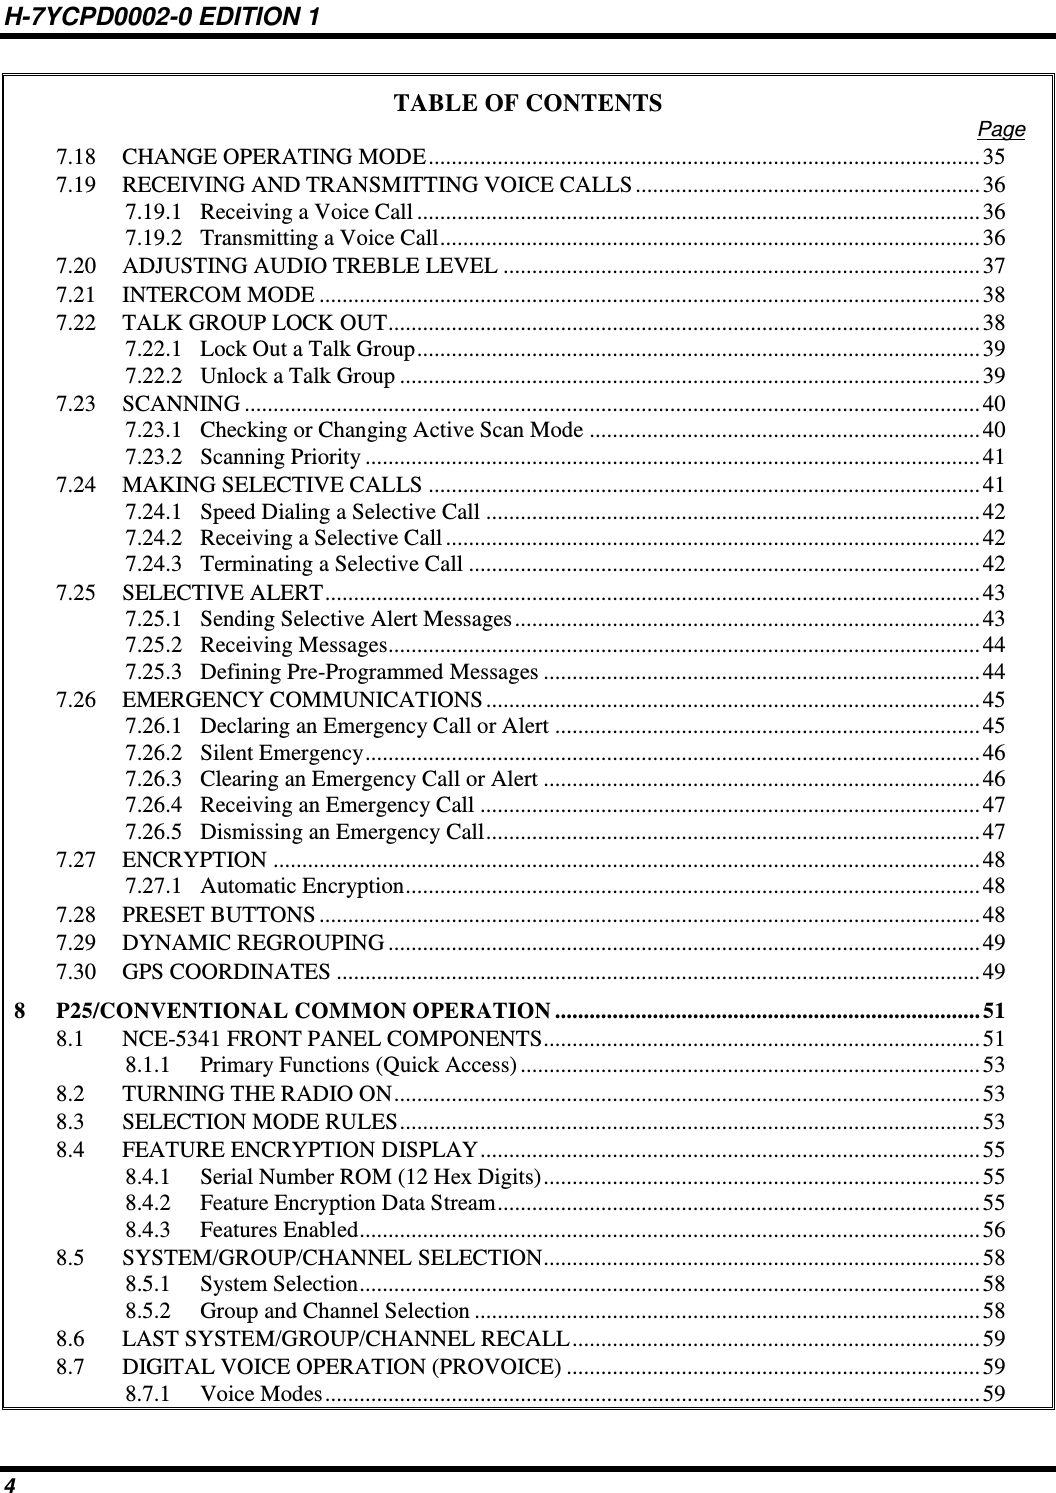 H-7YCPD0002-0 EDITION 1 4 TABLE OF CONTENTS Page 7.18 CHANGE OPERATING MODE ................................................................................................ 35 7.19 RECEIVING AND TRANSMITTING VOICE CALLS ............................................................ 36 7.19.1 Receiving a Voice Call .................................................................................................. 36 7.19.2 Transmitting a Voice Call .............................................................................................. 36 7.20 ADJUSTING AUDIO TREBLE LEVEL ................................................................................... 37 7.21 INTERCOM MODE ................................................................................................................... 38 7.22 TALK GROUP LOCK OUT ....................................................................................................... 38 7.22.1 Lock Out a Talk Group .................................................................................................. 39 7.22.2 Unlock a Talk Group ..................................................................................................... 39 7.23 SCANNING ................................................................................................................................ 40 7.23.1 Checking or Changing Active Scan Mode .................................................................... 40 7.23.2 Scanning Priority ........................................................................................................... 41 7.24 MAKING SELECTIVE CALLS ................................................................................................ 41 7.24.1 Speed Dialing a Selective Call ...................................................................................... 42 7.24.2 Receiving a Selective Call ............................................................................................. 42 7.24.3 Terminating a Selective Call ......................................................................................... 42 7.25 SELECTIVE ALERT .................................................................................................................. 43 7.25.1 Sending Selective Alert Messages ................................................................................. 43 7.25.2 Receiving Messages....................................................................................................... 44 7.25.3 Defining Pre-Programmed Messages ............................................................................ 44 7.26 EMERGENCY COMMUNICATIONS ...................................................................................... 45 7.26.1 Declaring an Emergency Call or Alert .......................................................................... 45 7.26.2 Silent Emergency ........................................................................................................... 46 7.26.3 Clearing an Emergency Call or Alert ............................................................................ 46 7.26.4 Receiving an Emergency Call ....................................................................................... 47 7.26.5 Dismissing an Emergency Call ...................................................................................... 47 7.27 ENCRYPTION ........................................................................................................................... 48 7.27.1 Automatic Encryption .................................................................................................... 48 7.28 PRESET BUTTONS ................................................................................................................... 48 7.29 DYNAMIC REGROUPING ....................................................................................................... 49 7.30 GPS COORDINATES ................................................................................................................ 49 8 P25/CONVENTIONAL COMMON OPERATION .......................................................................... 51 8.1 NCE-5341 FRONT PANEL COMPONENTS ............................................................................ 51 8.1.1 Primary Functions (Quick Access) ................................................................................ 53 8.2 TURNING THE RADIO ON ...................................................................................................... 53 8.3 SELECTION MODE RULES ..................................................................................................... 53 8.4 FEATURE ENCRYPTION DISPLAY ....................................................................................... 55 8.4.1 Serial Number ROM (12 Hex Digits) ............................................................................ 55 8.4.2 Feature Encryption Data Stream .................................................................................... 55 8.4.3 Features Enabled ............................................................................................................ 56 8.5 SYSTEM/GROUP/CHANNEL SELECTION ............................................................................ 58 8.5.1 System Selection ............................................................................................................ 58 8.5.2 Group and Channel Selection ........................................................................................ 58 8.6 LAST SYSTEM/GROUP/CHANNEL RECALL ....................................................................... 59 8.7 DIGITAL VOICE OPERATION (PROVOICE) ........................................................................ 59 8.7.1 Voice Modes .................................................................................................................. 59 